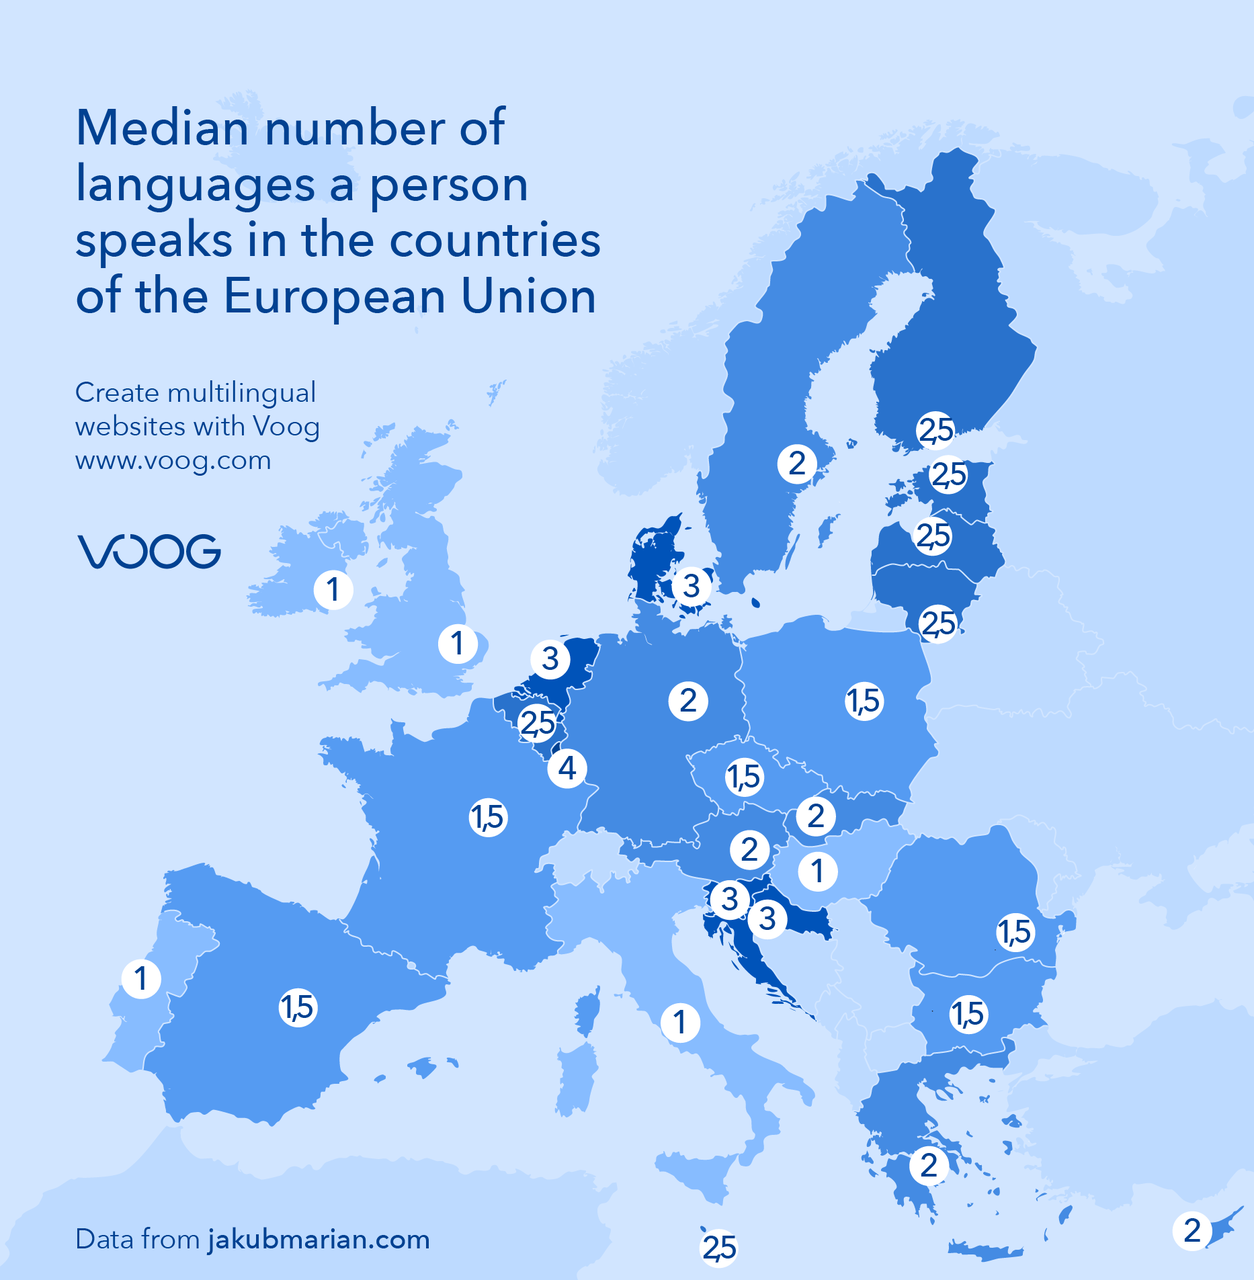 Median number of languages a person speaks in the countries of the European Union